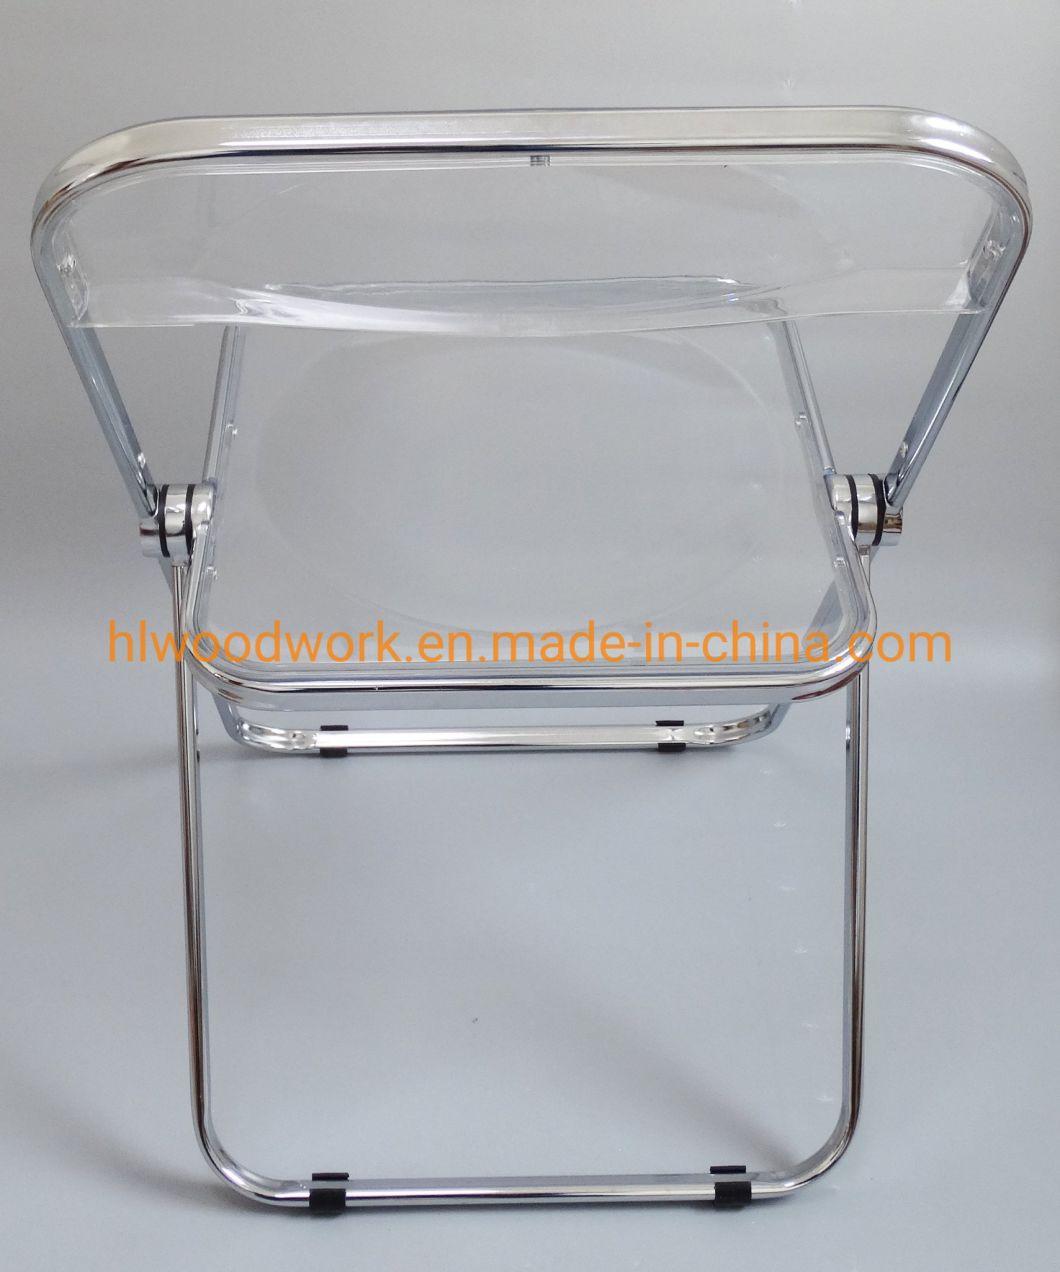 Modern Transparent Green Folding Chair PC Plastic Dining Room Chair Chrome Frame Office Bar Dining Leisure Banquet Wedding Meeting Chair Plastic Dining Chair